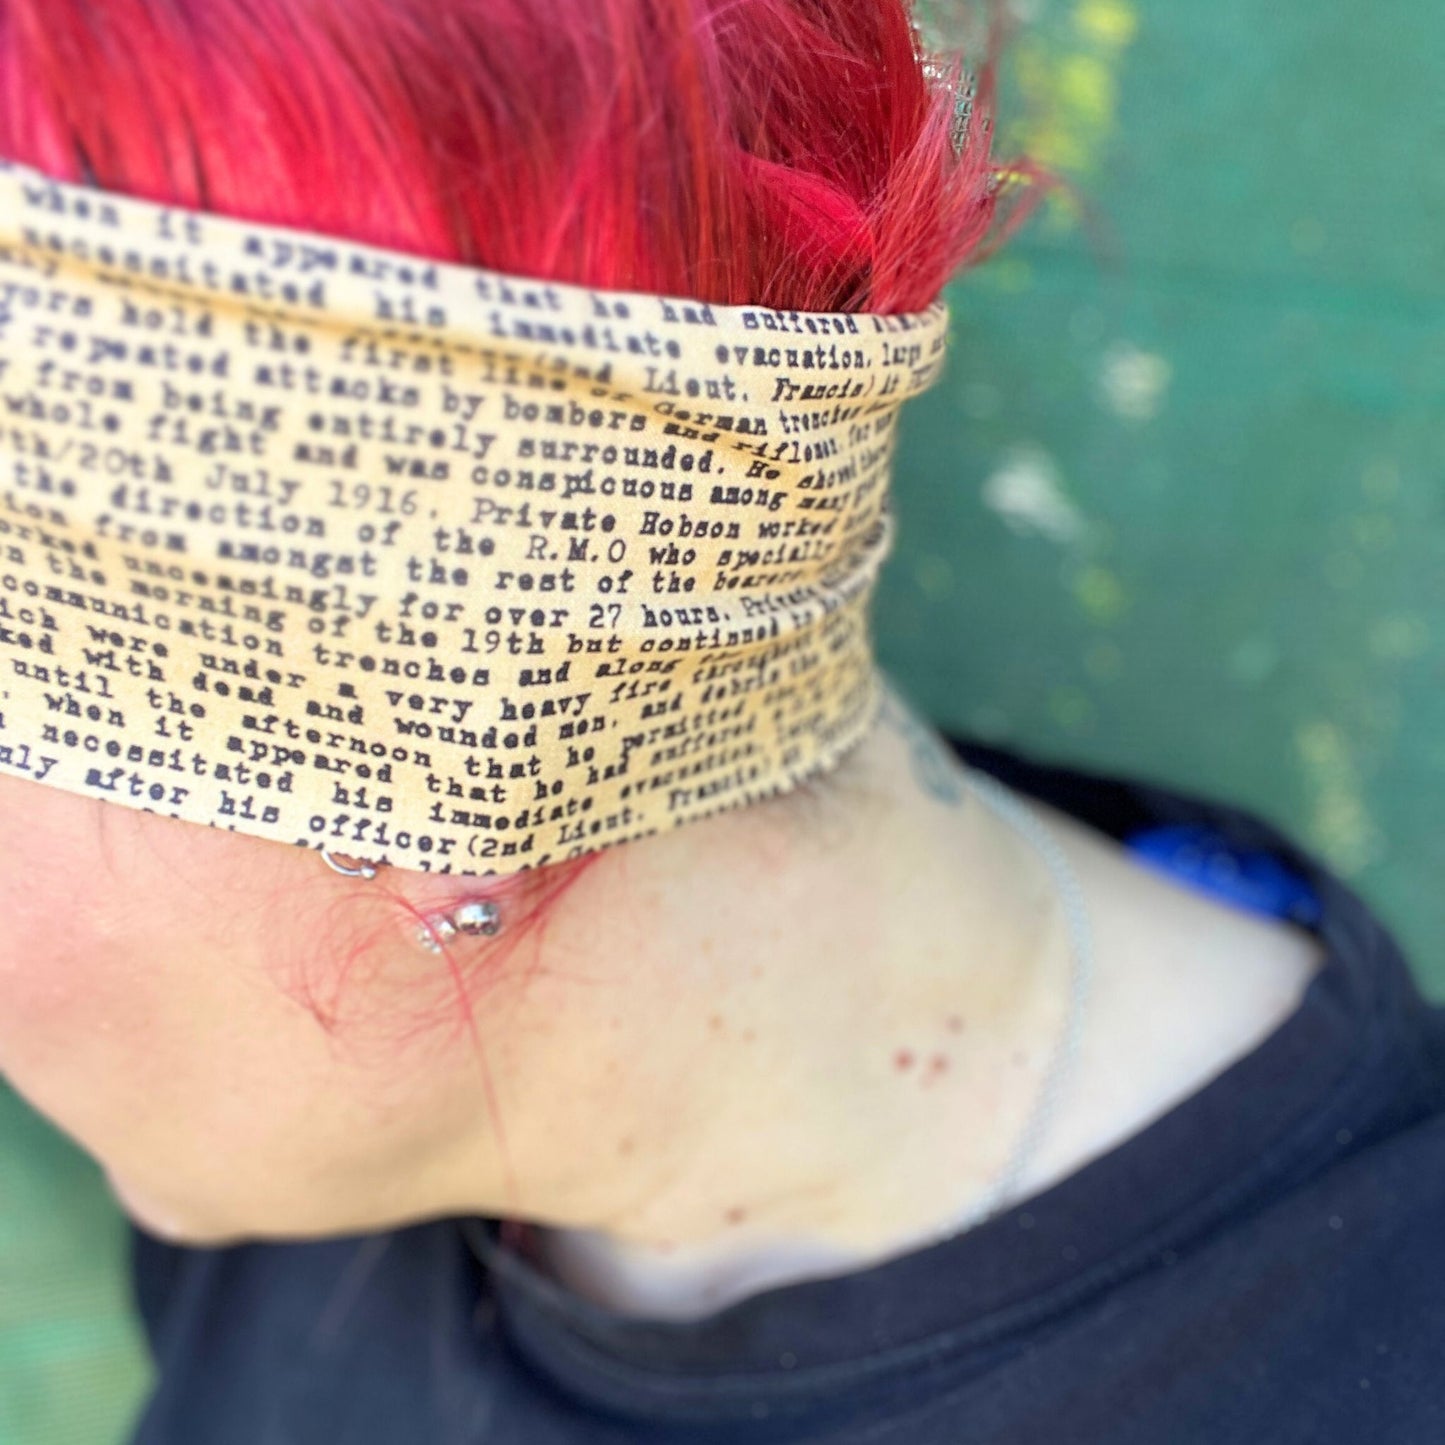 In this image, a woman sports a vibrant red hairstyle, complementing it with a wire headwrap that features an ANZAC soldier's letter a unique print. Adding a historical touch to the headwrap’s design. The headwrap is tied at the top, giving it a bow-like appearance, which accentuates its stylish and laid-back vibe. The woman is looking down, showcasing the headwrap as the standout accessory.